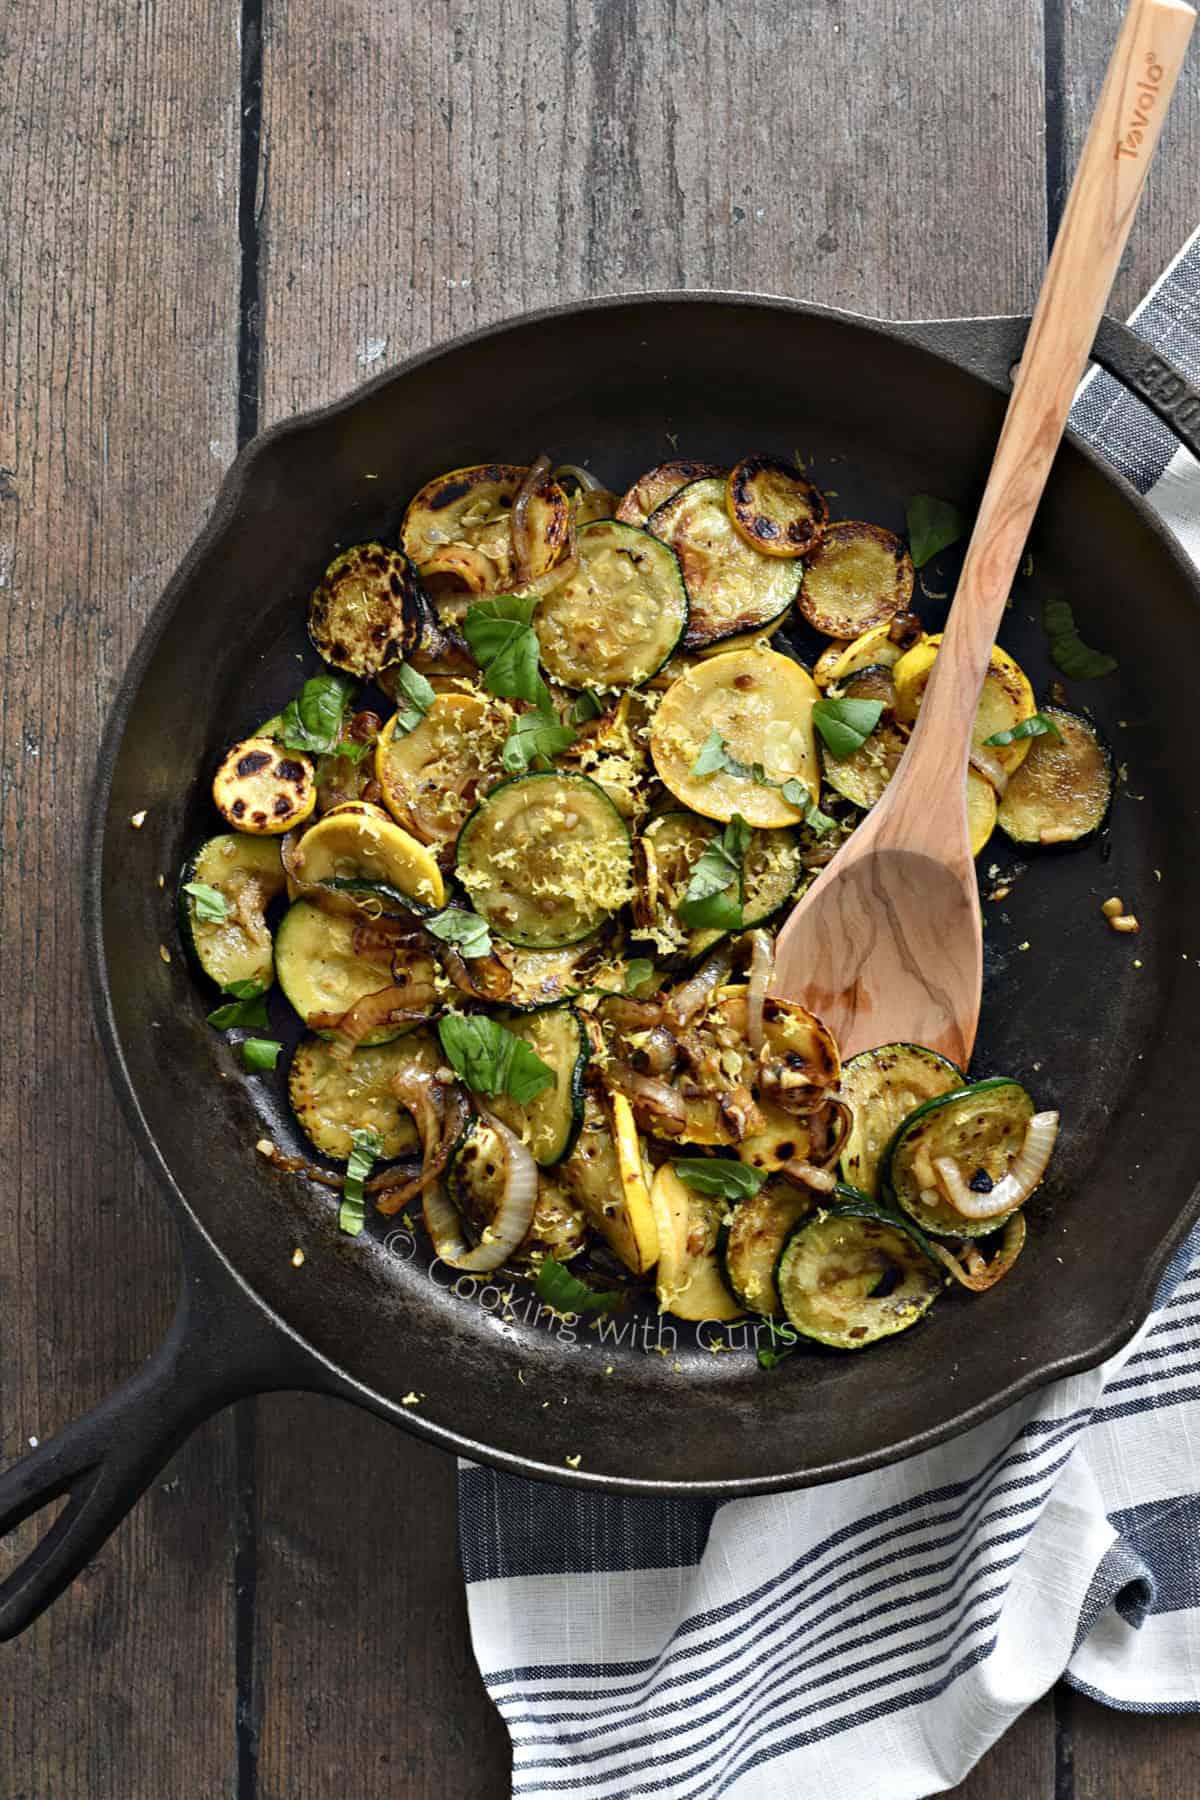 Looking down on sautéed zucchini, yellow squash and onions in a cast iron skillet with a wooden spoon on the right hand side. 